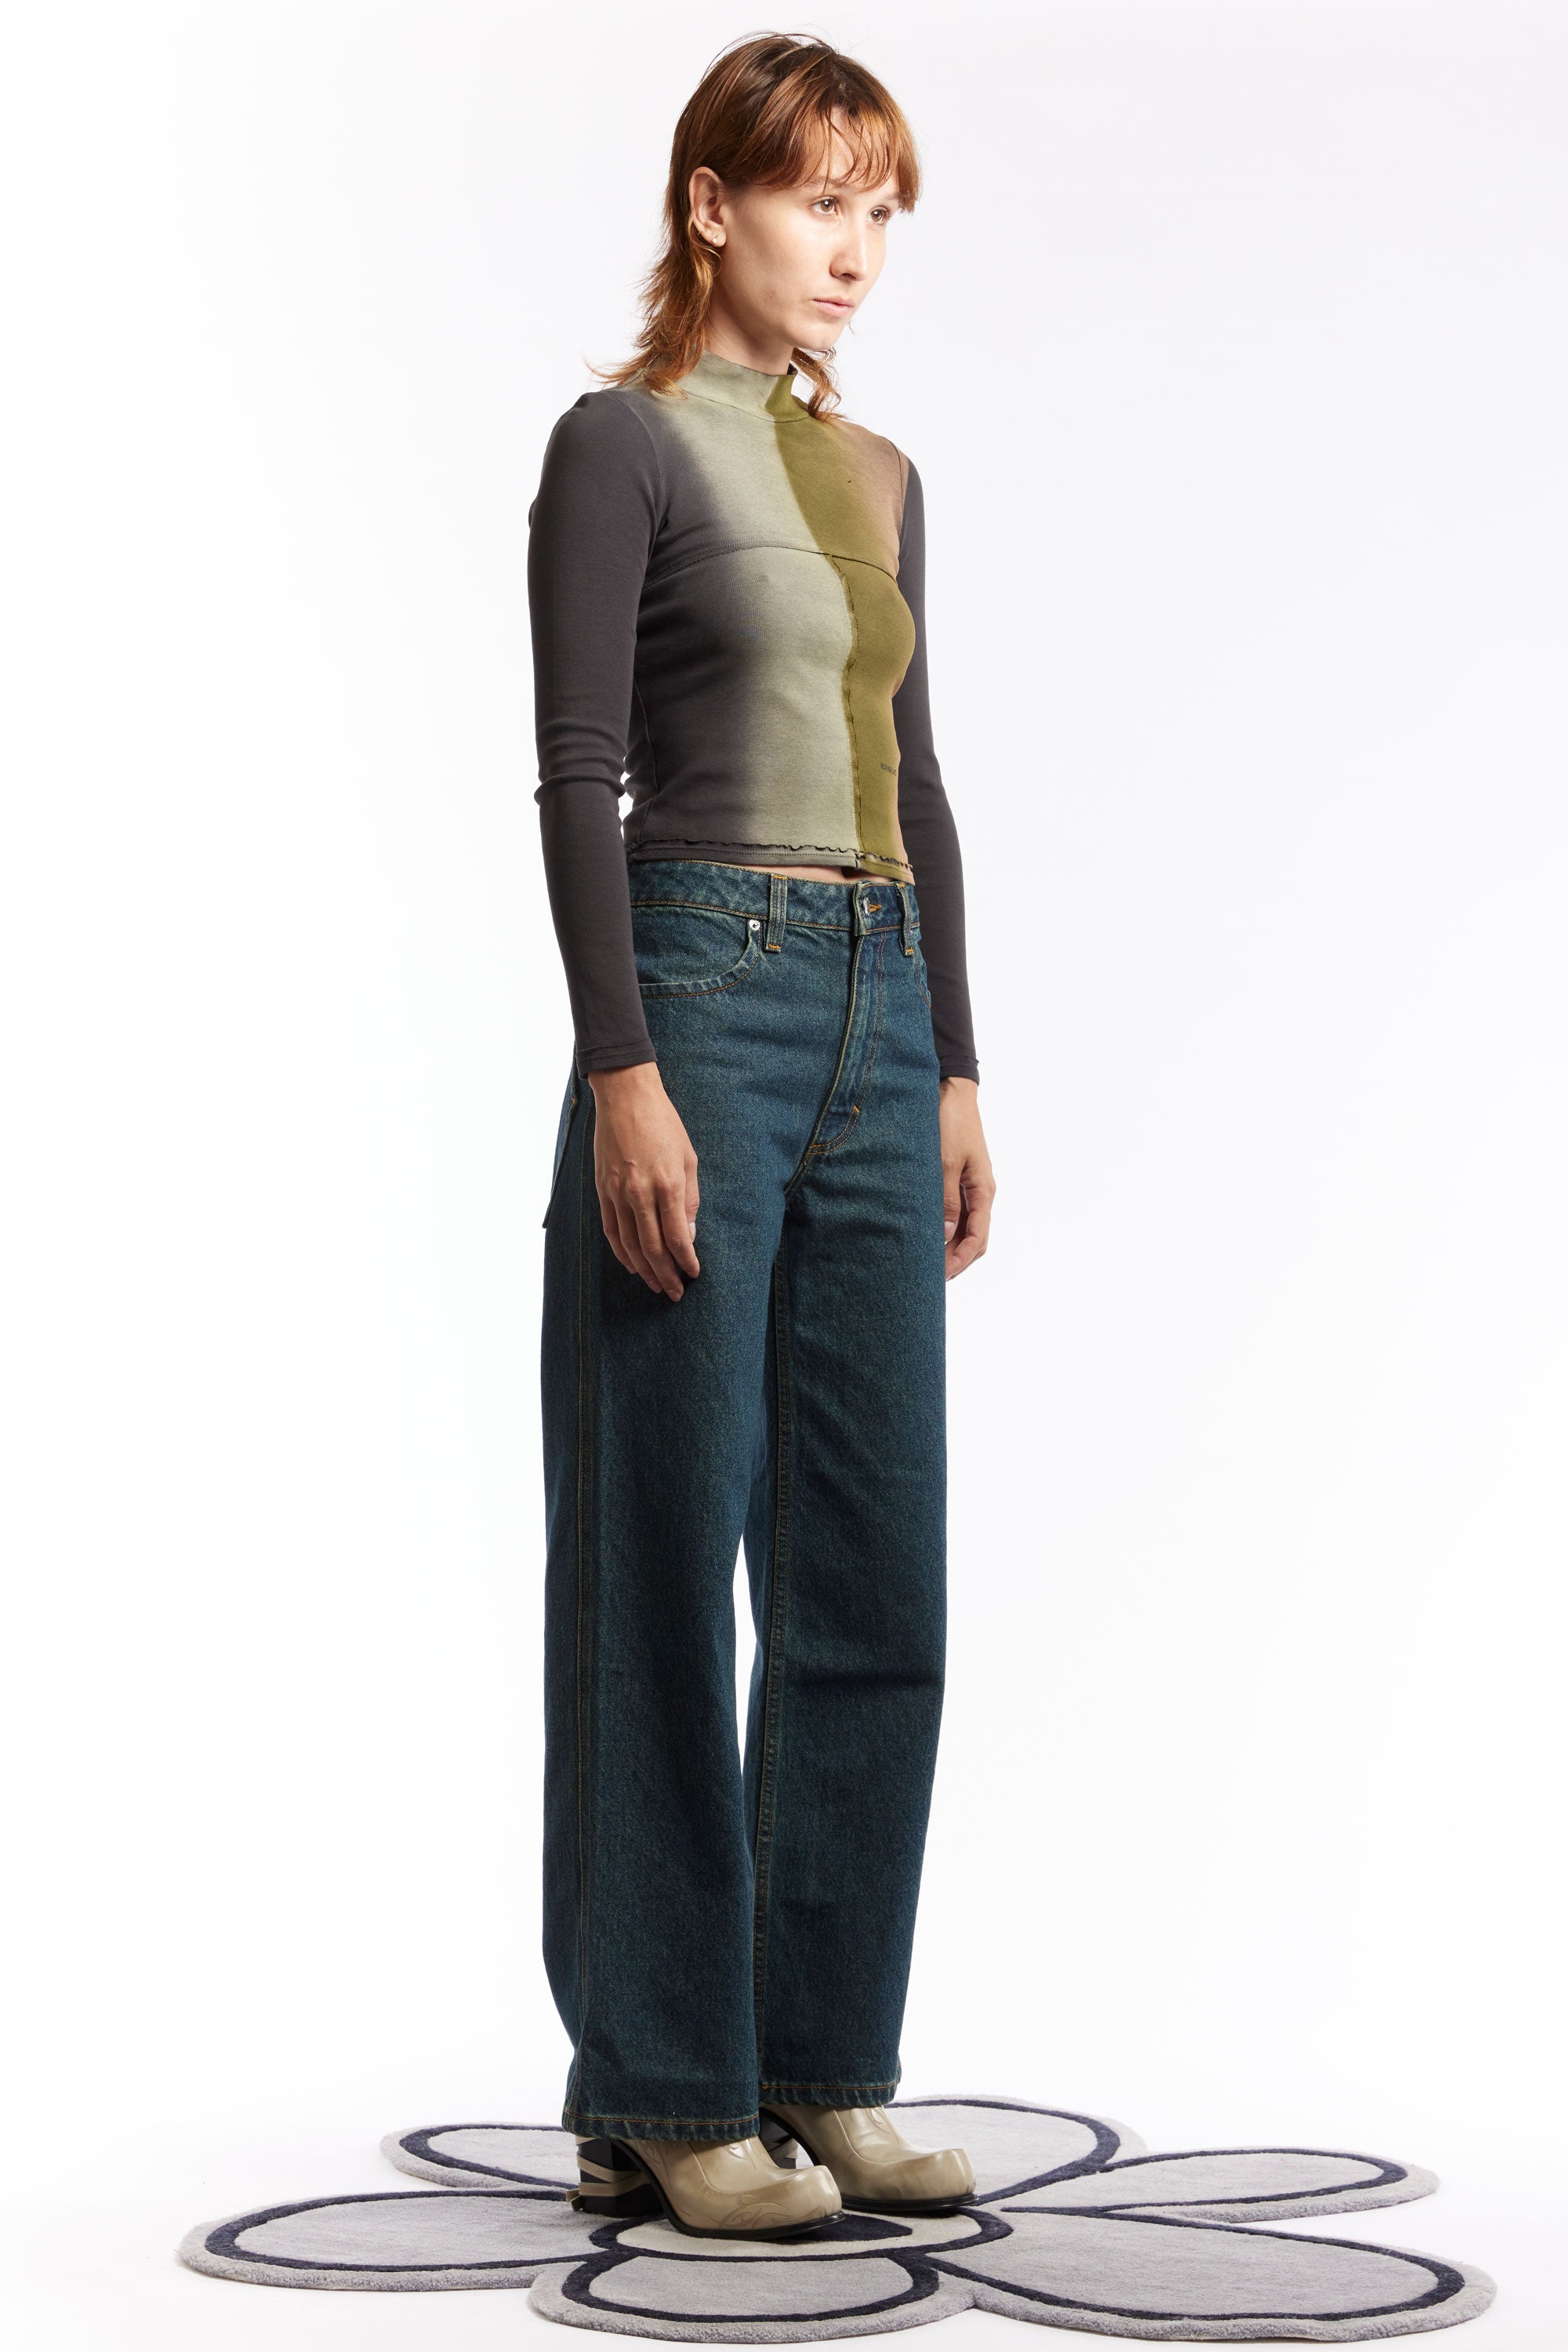 The ECKHAUS LATTA - WIDE LEG JEAN NEW BLUE  available online with global shipping, and in PAM Stores Melbourne and Sydney.